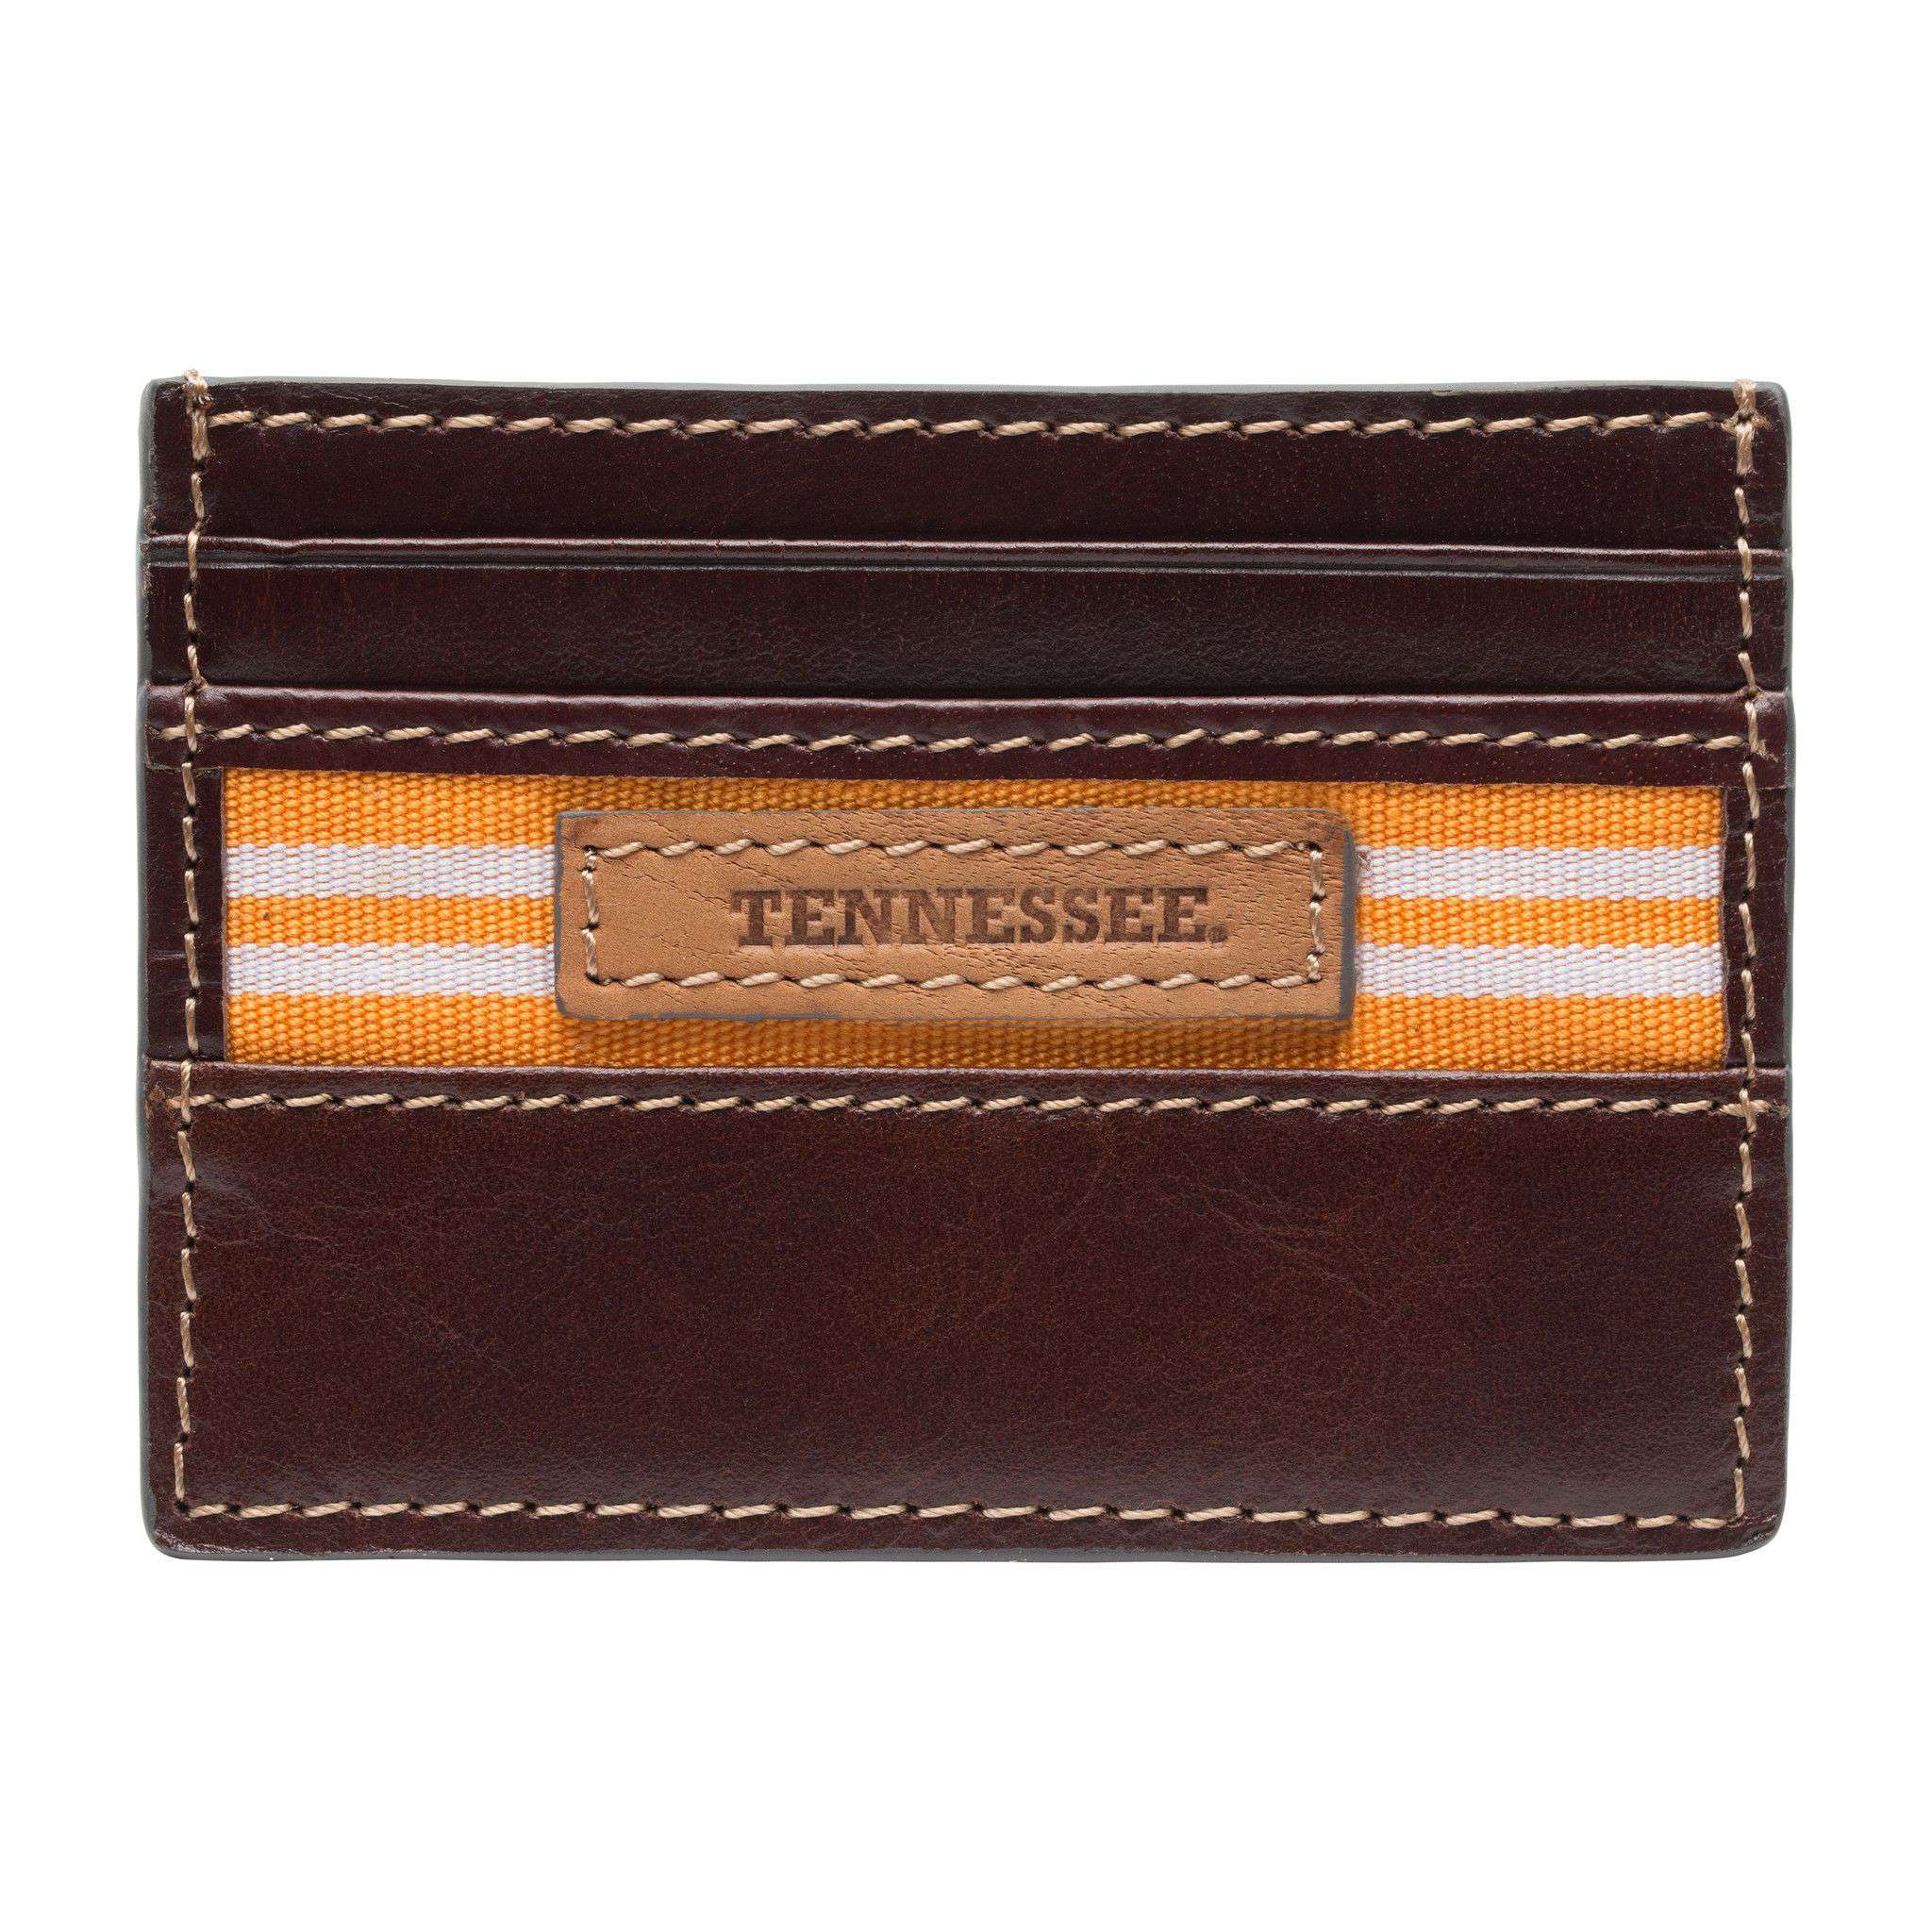 Tennessee Volunteers Tailgate ID Window Card Case by Jack Mason - Country Club Prep